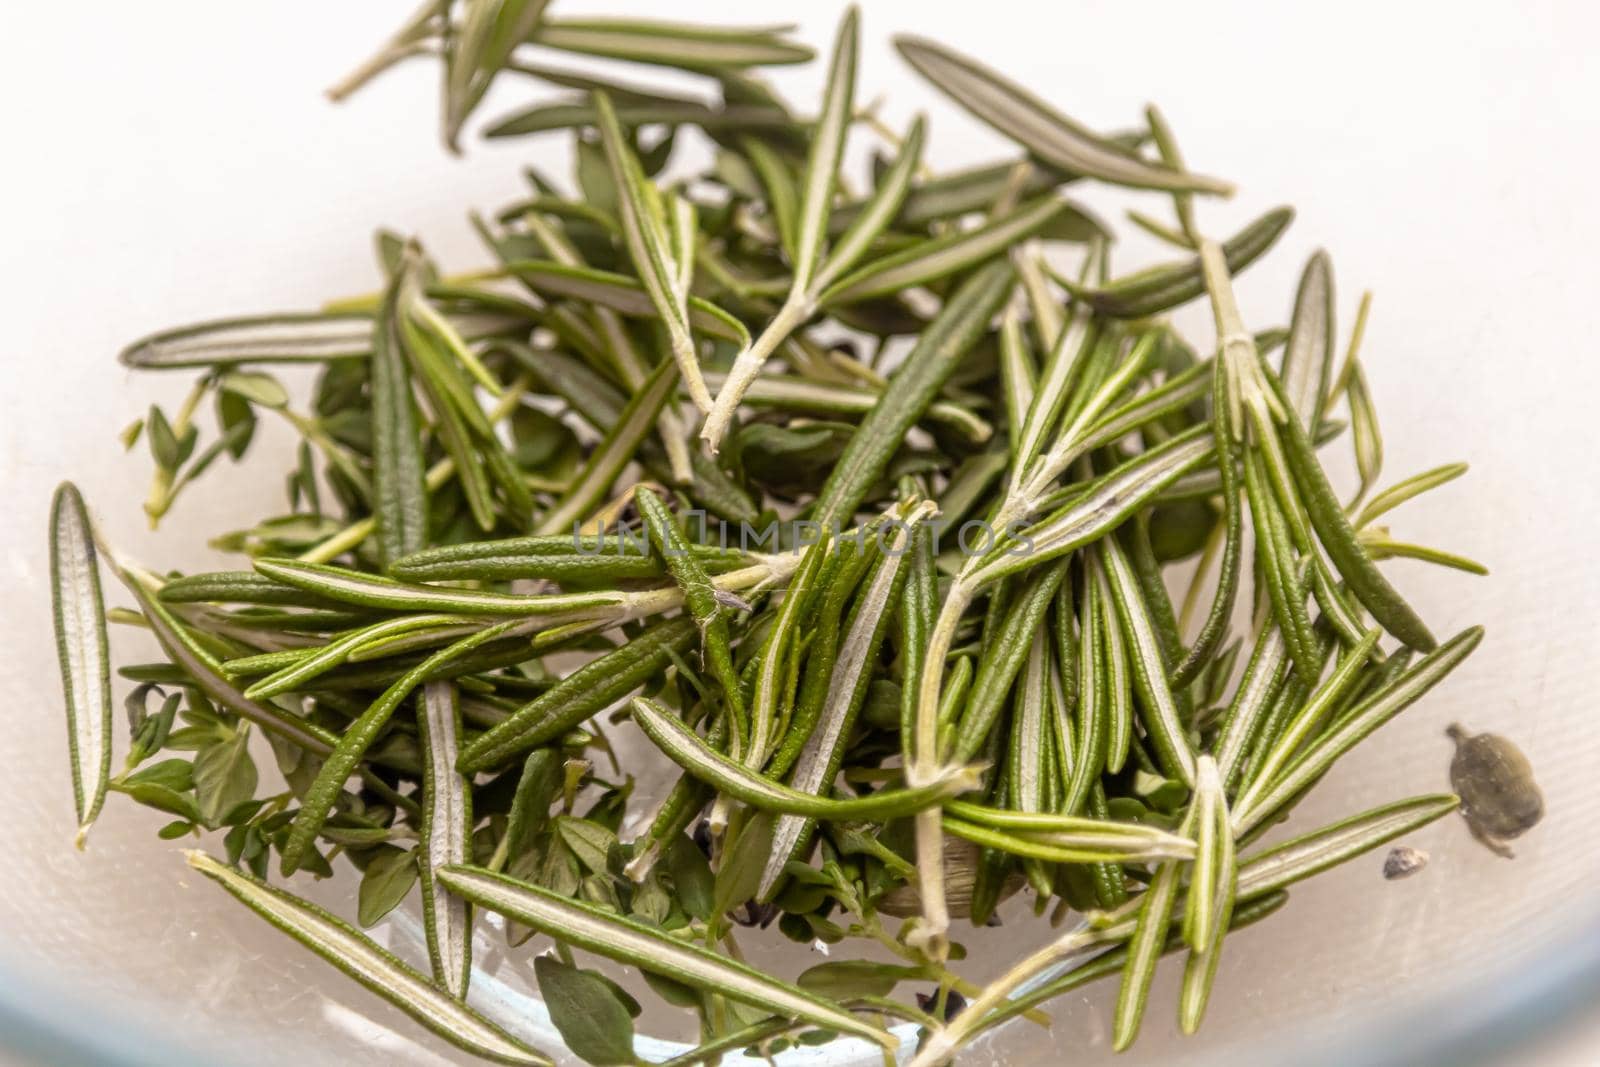 chopped fresh rosemary sprinkled on a white background. Aromatic spice rosemary isolated on white.